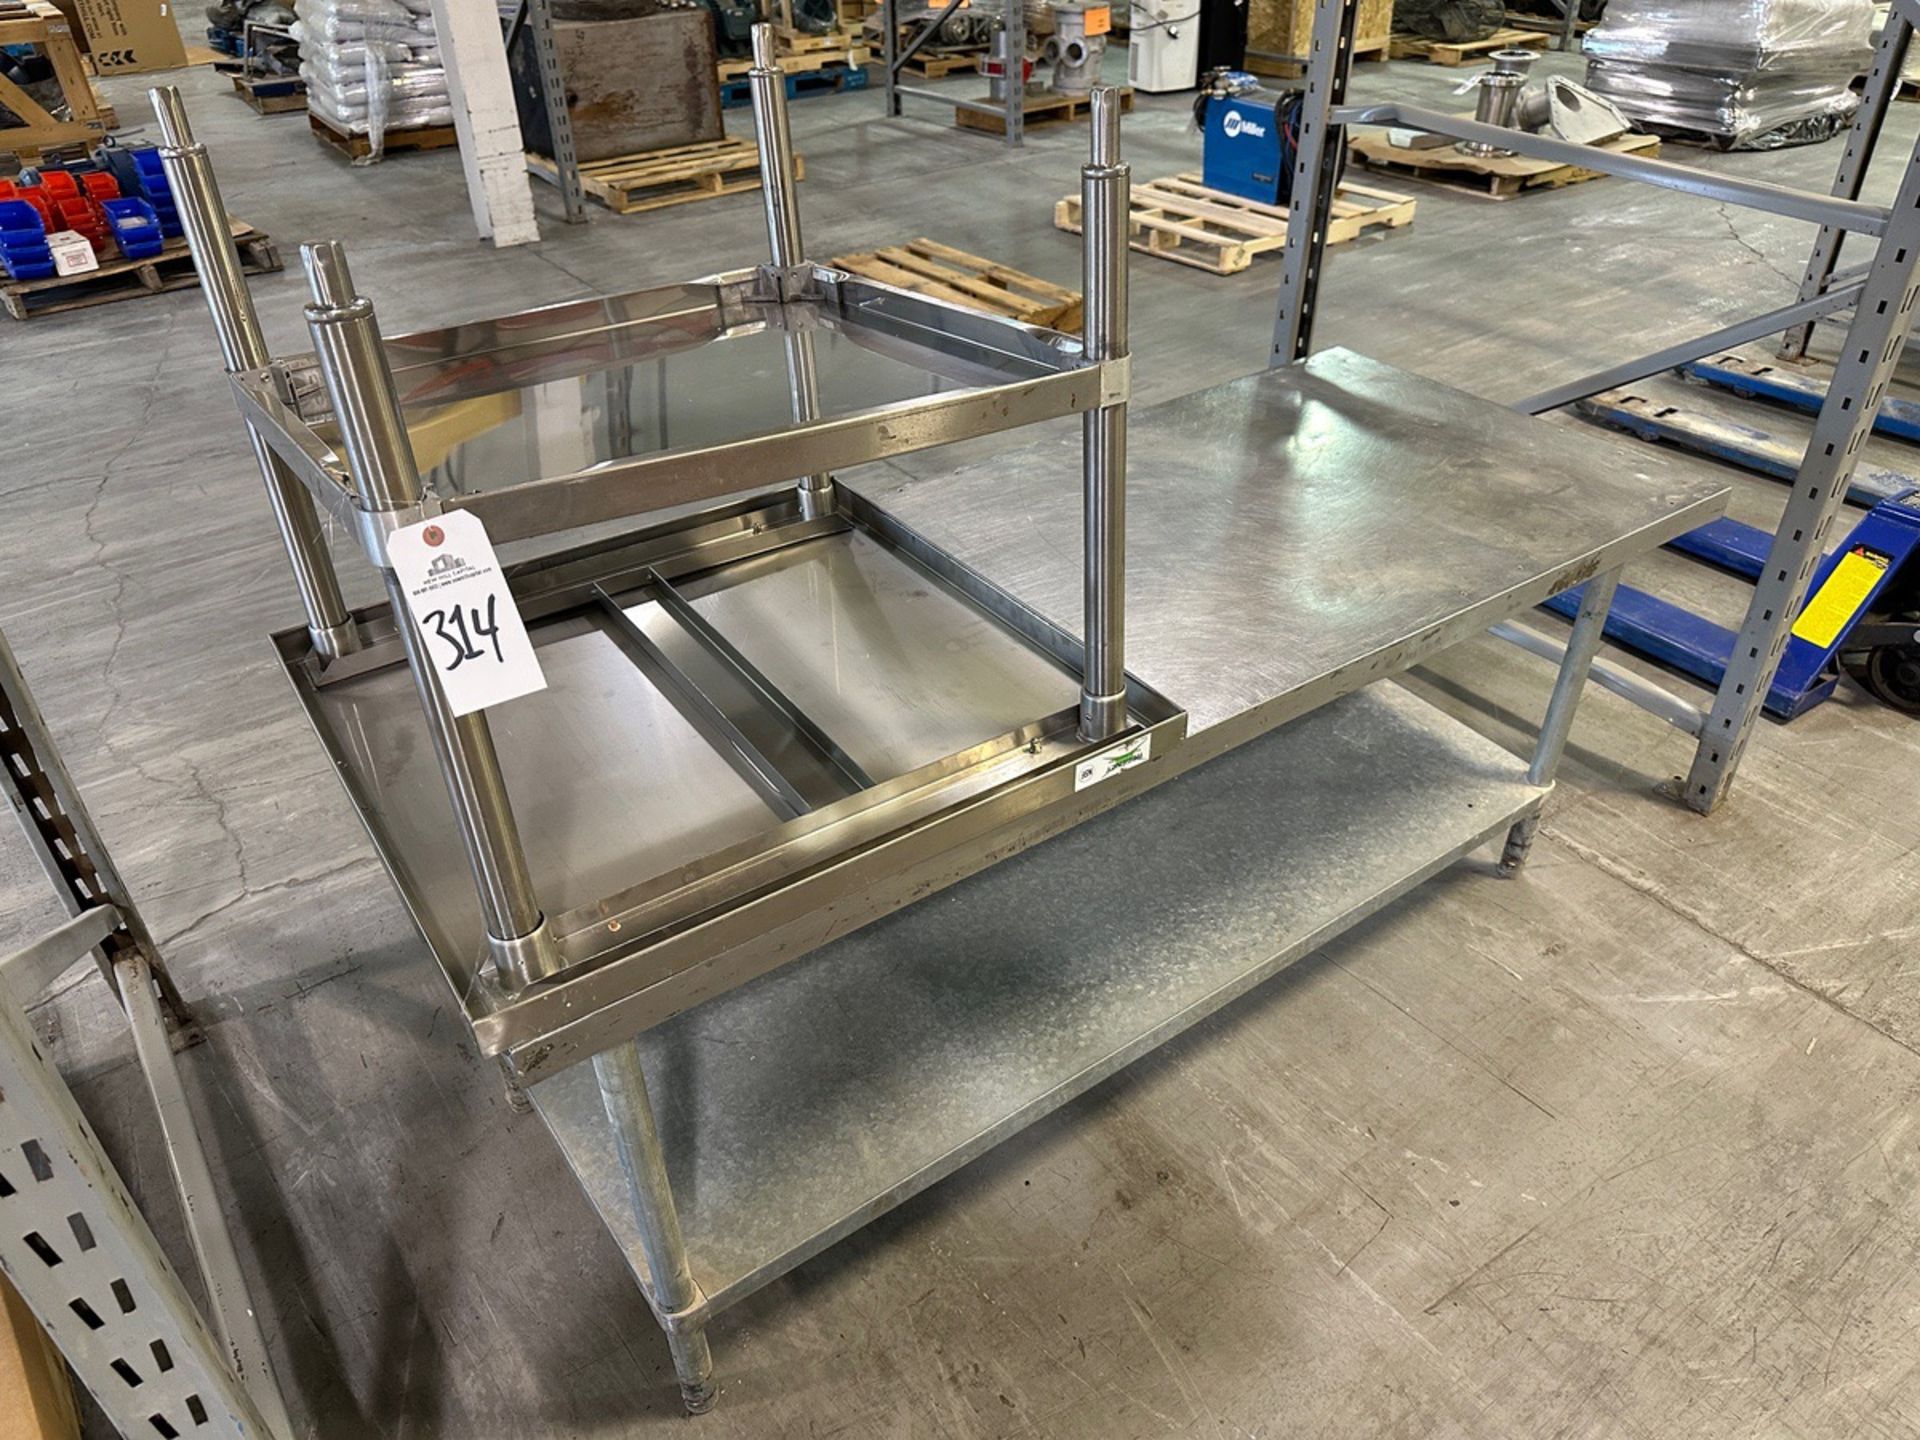 Lot of (2) Stainless Steel Tables - (1) 30" x 6' and (1) 30" x 30"